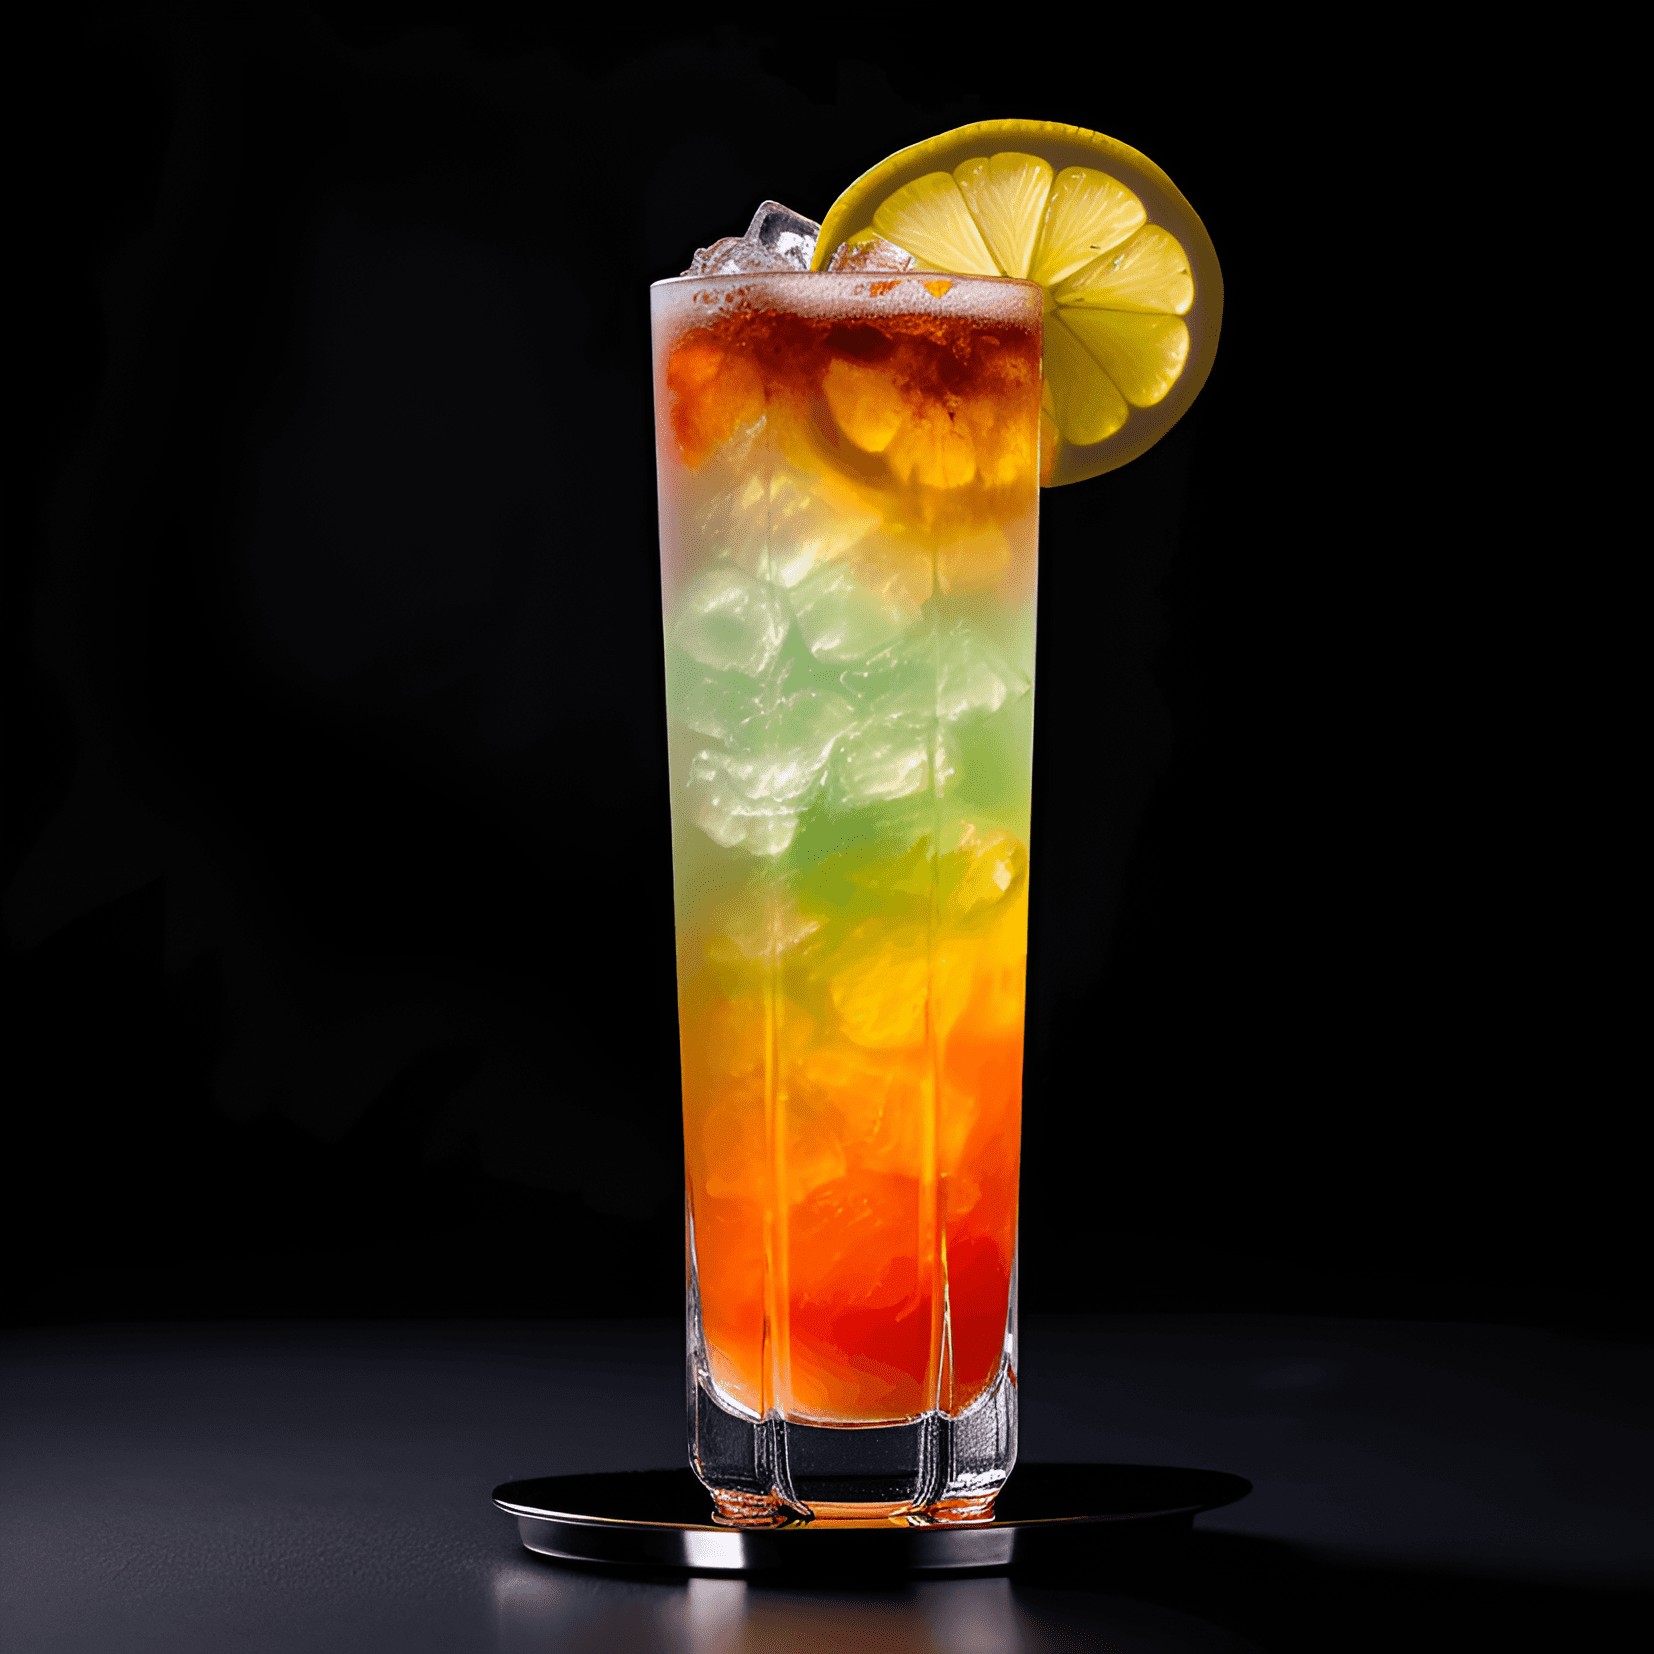 The Quarantine cocktail is a delightful mix of sweet, sour, and slightly spicy flavors. The fruity notes from the orange and pineapple juices are balanced by the tangy lime and the subtle heat from the ginger syrup, while the rum adds a smooth, warming finish.